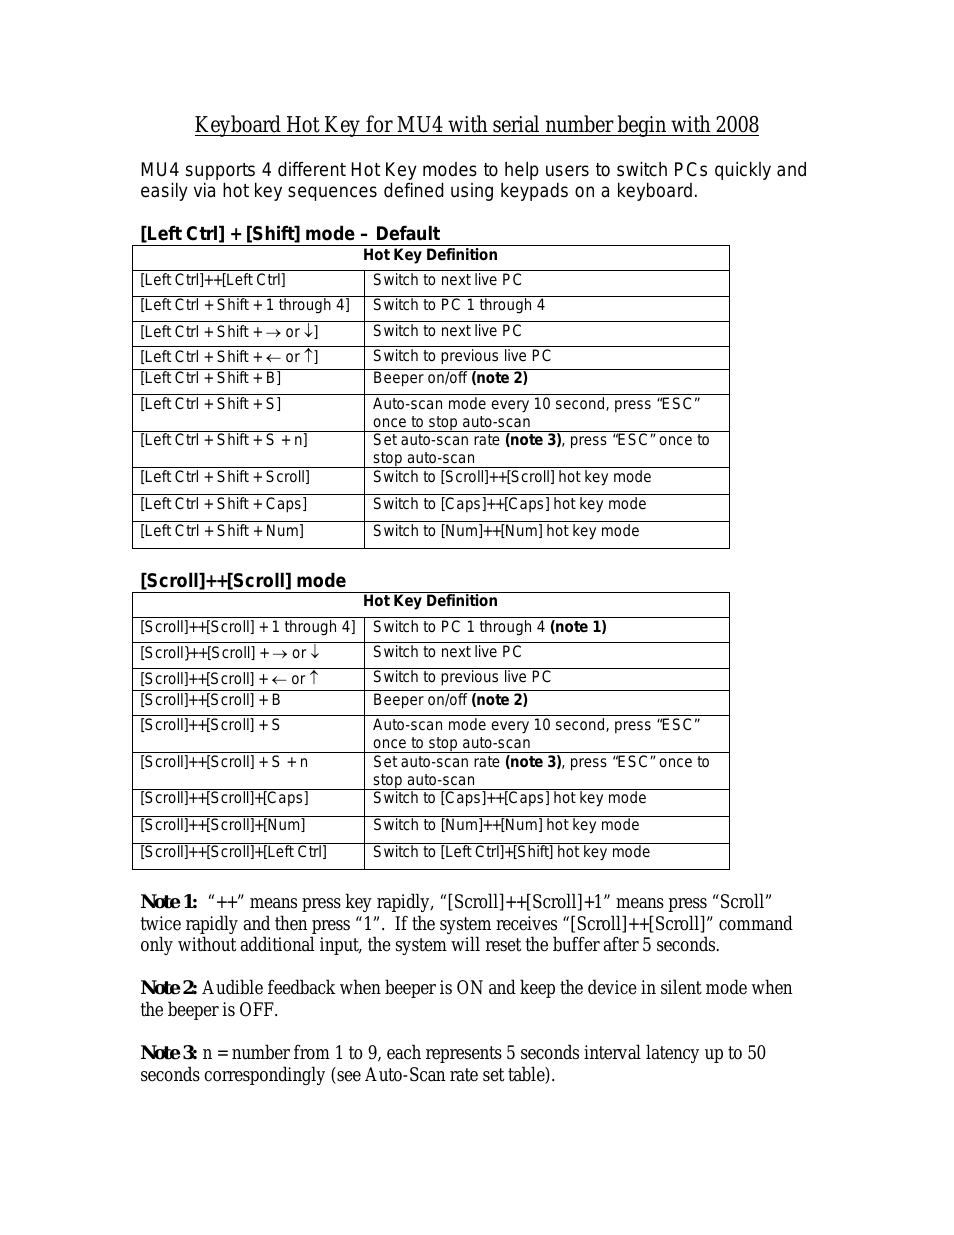 MU4 HIS (New HotKey instruction sheet for serial number begin w/ 2008......)